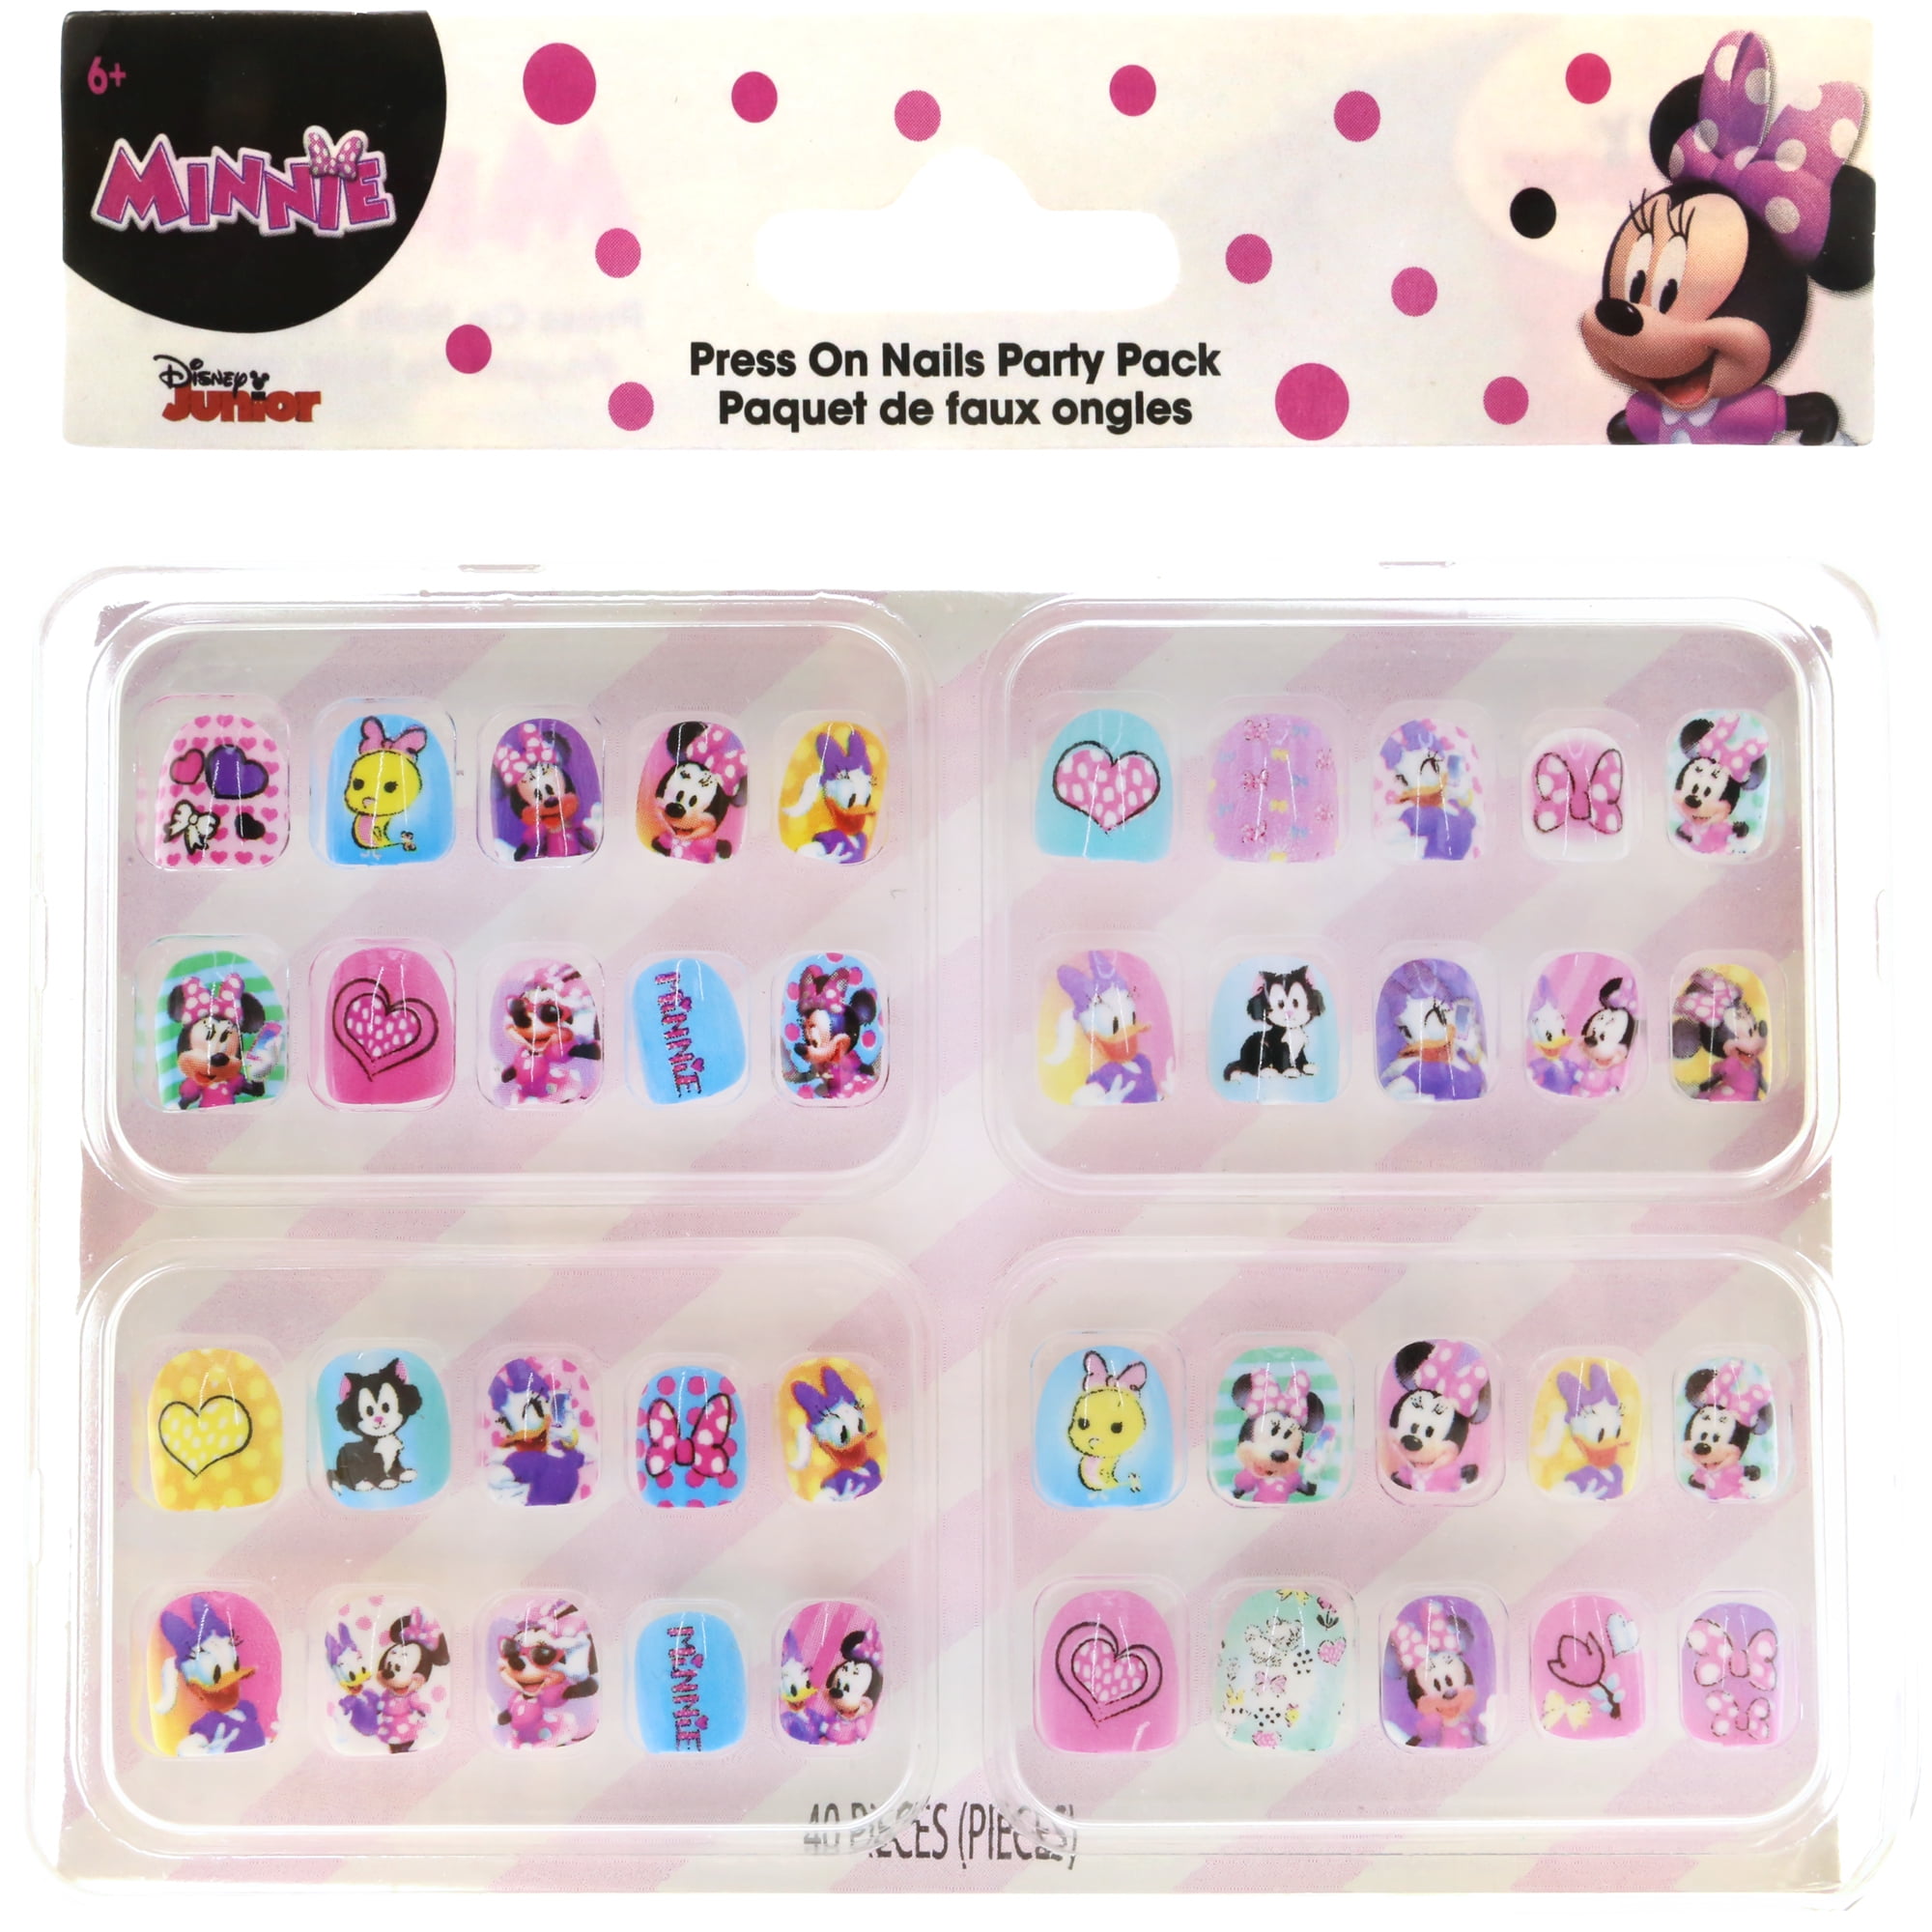 Minnie Mouse Press on Nails